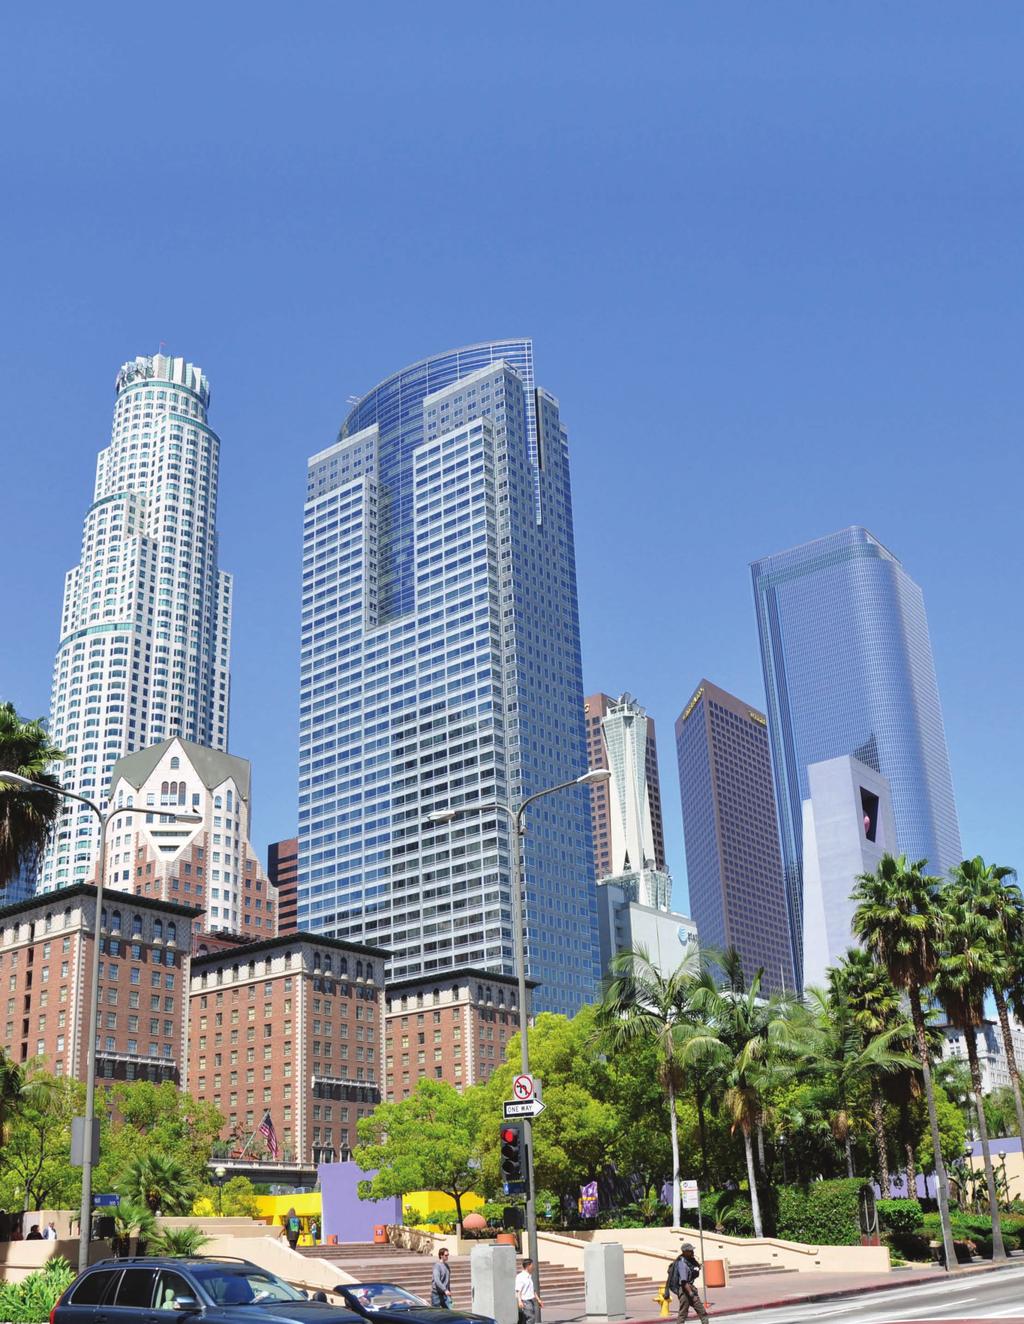 Community Redevelopment Agency of the CITY OF LOS ANGELES LAYMAN S GUIDE TO CRA/LA POLICIES An